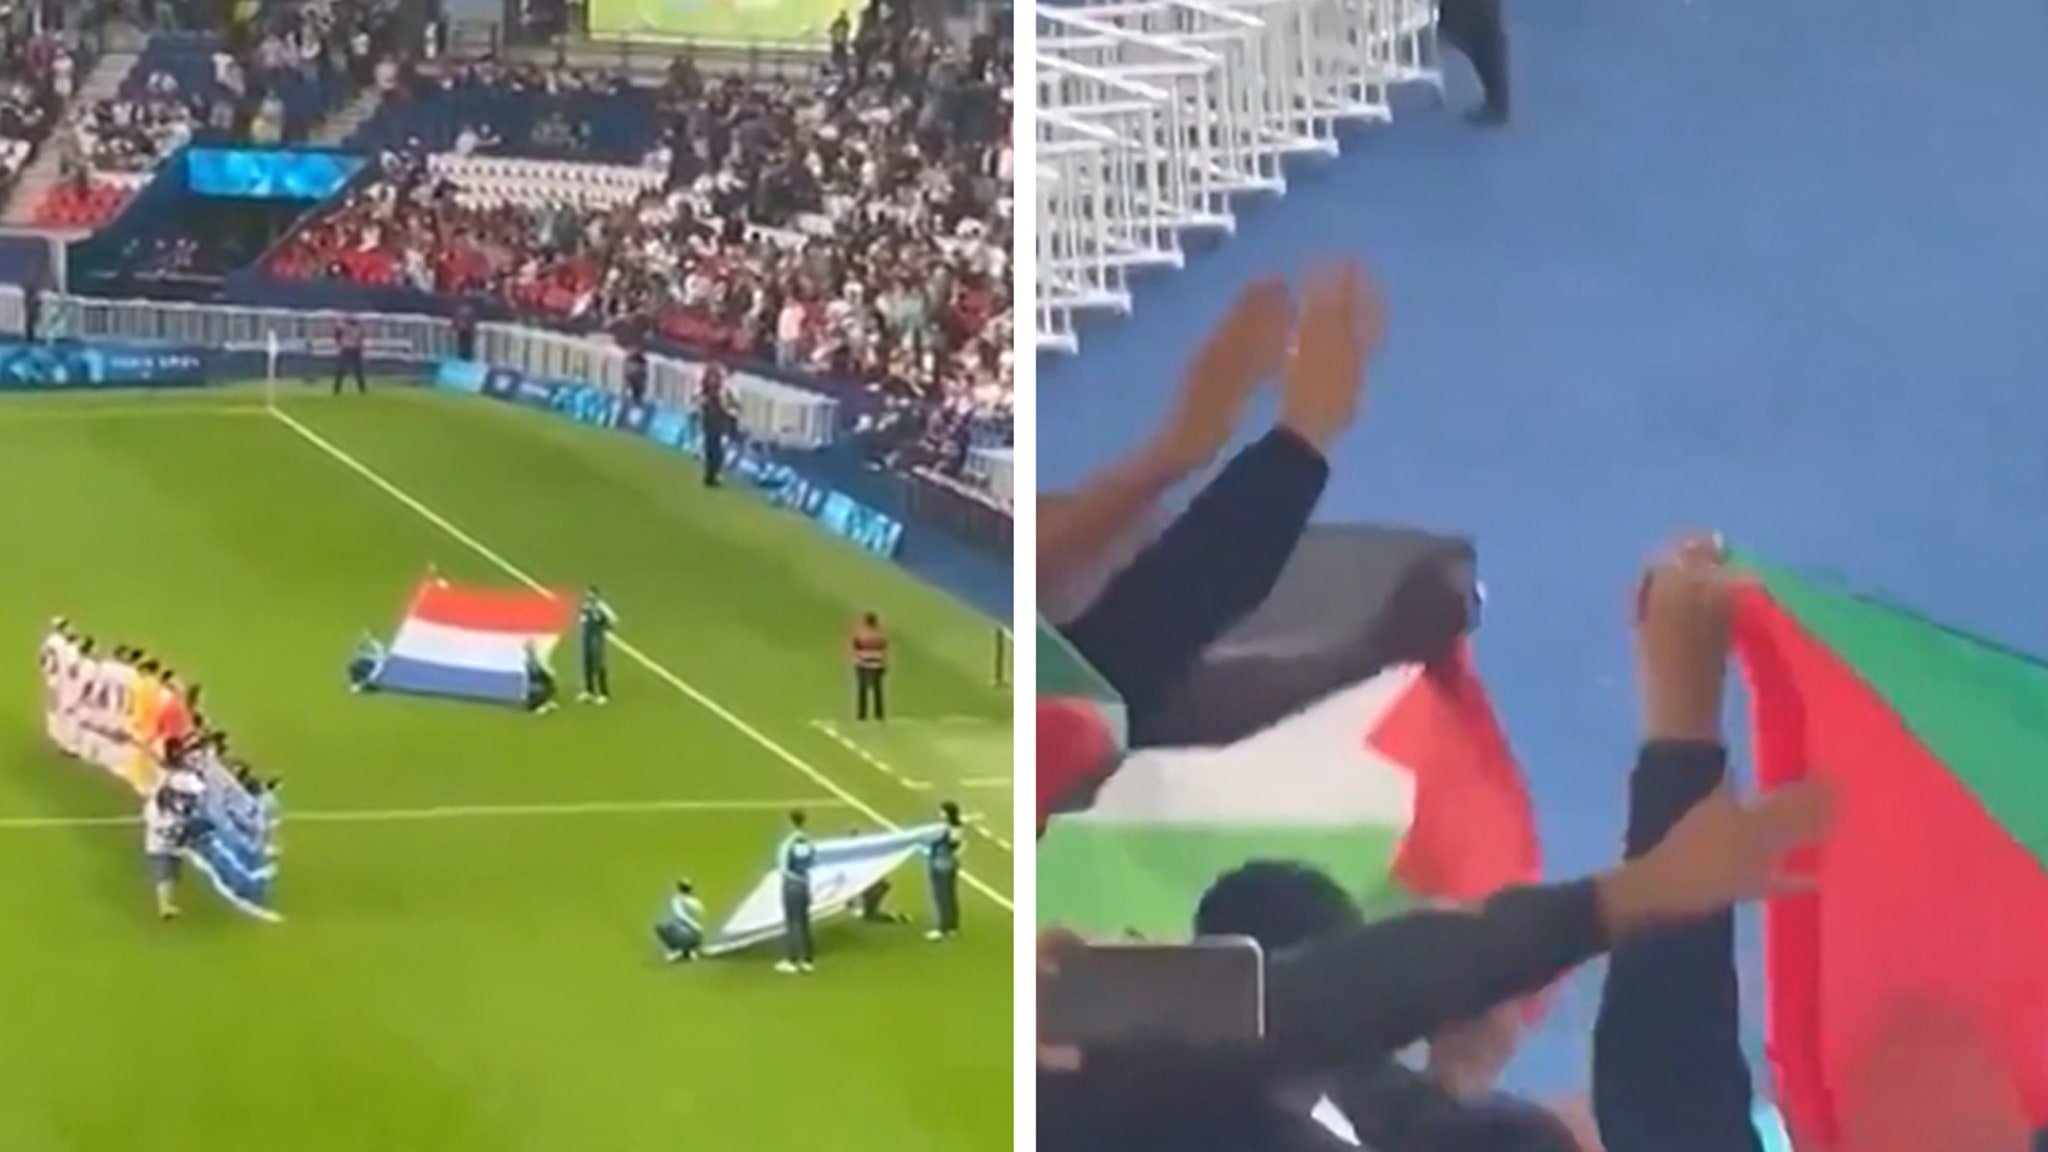 Pro-Palestine Protesters Chant 'Heil Hitler' at Israel's Olympics Soccer Match